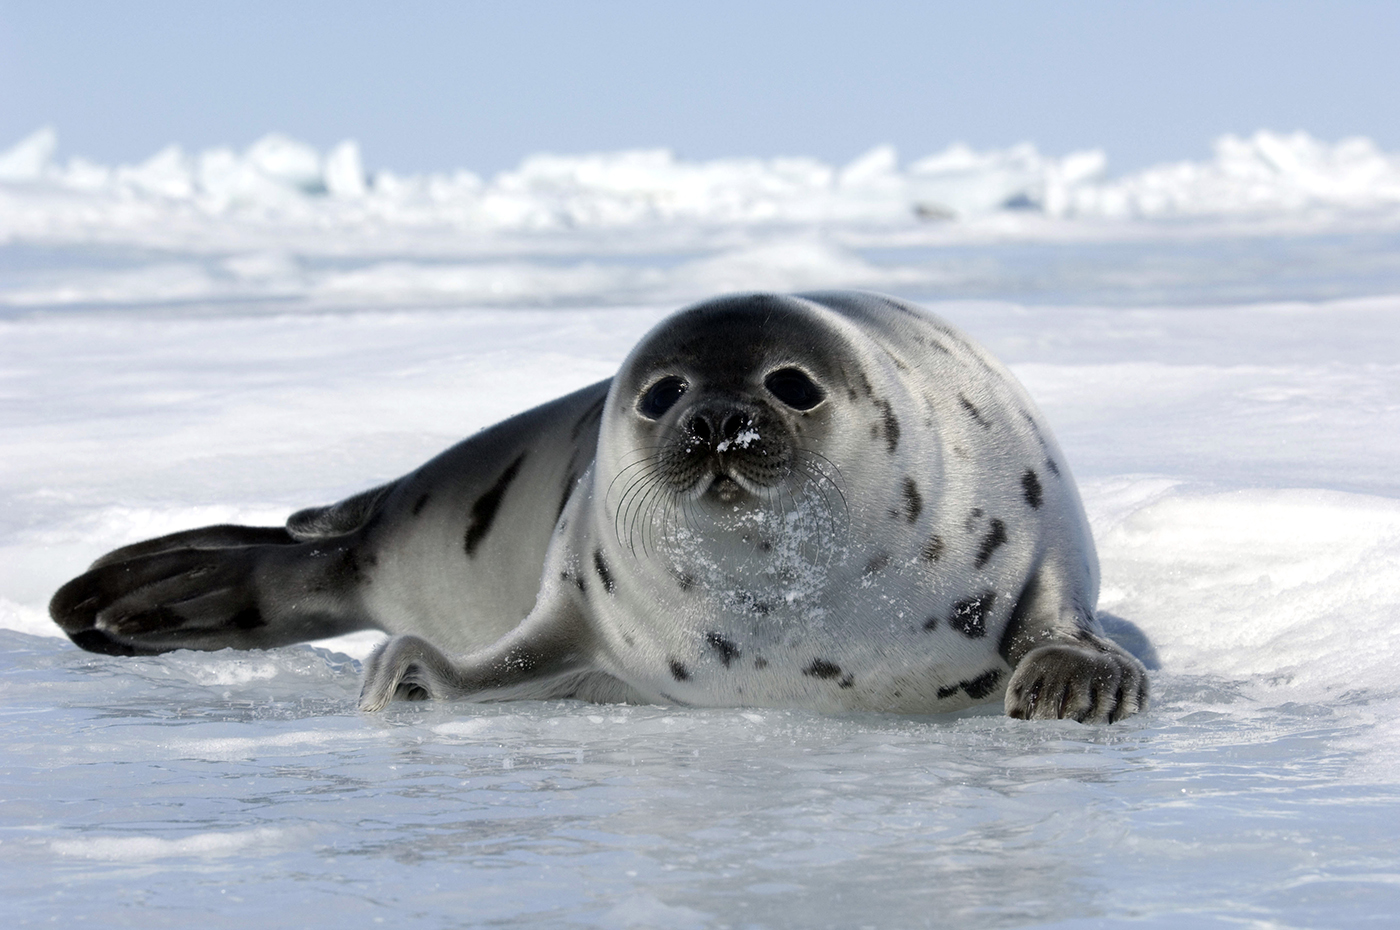 Help end Canada’s commercial seal hunt International Fund for Animal